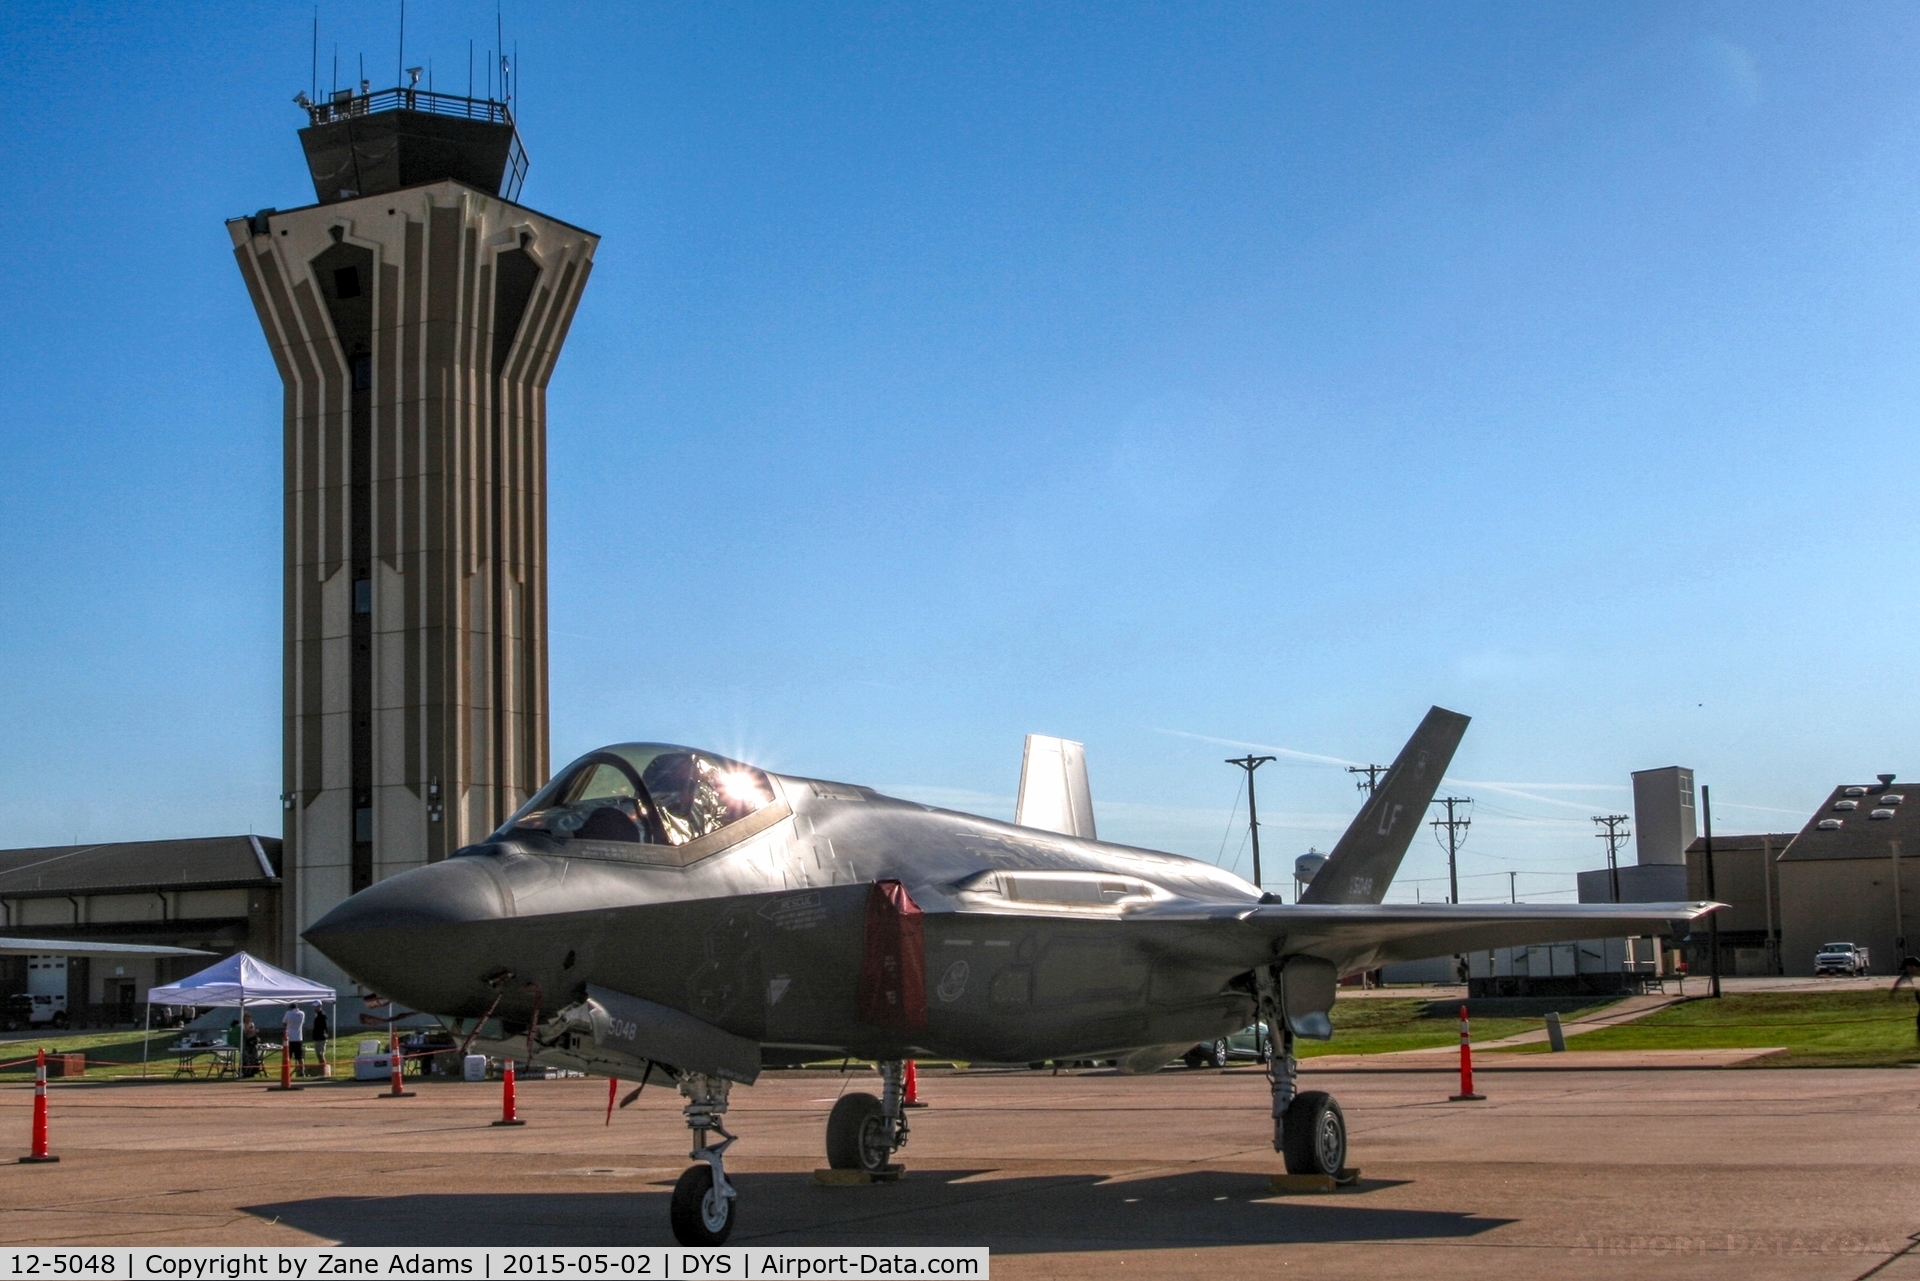 12-5048, 2012 Lockheed Martin F-35A Lightning II C/N AF-59, At the 2015 Big Country Airshow - Dyess AFB, Texas